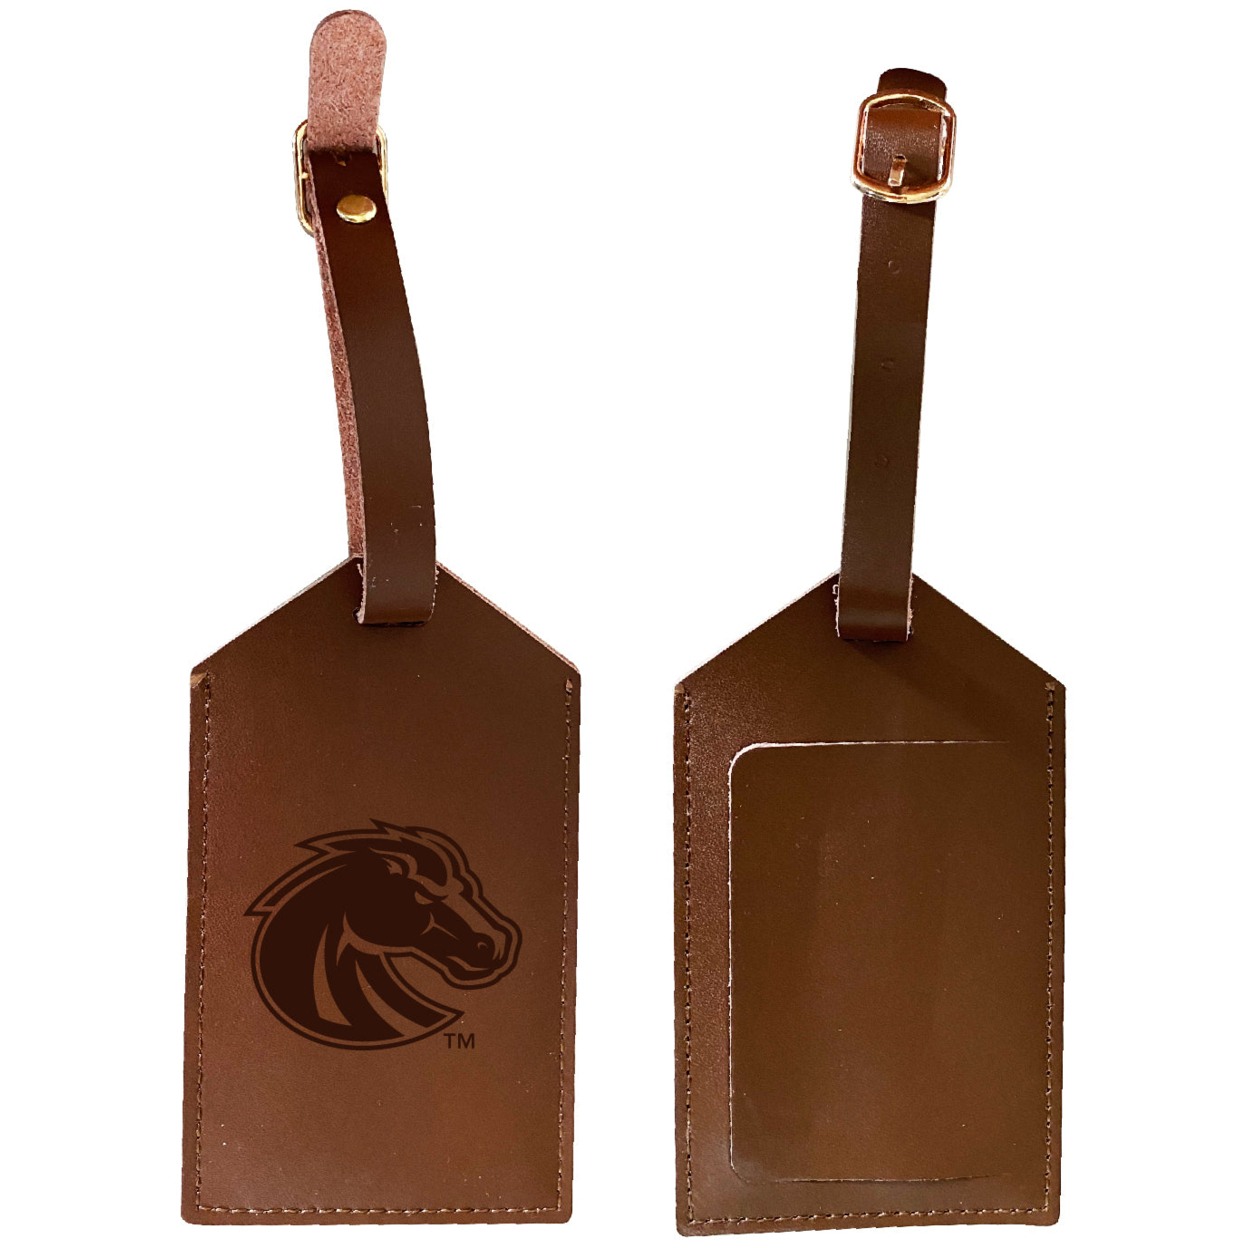 Boise State Broncos Leather Luggage Tag Engraved